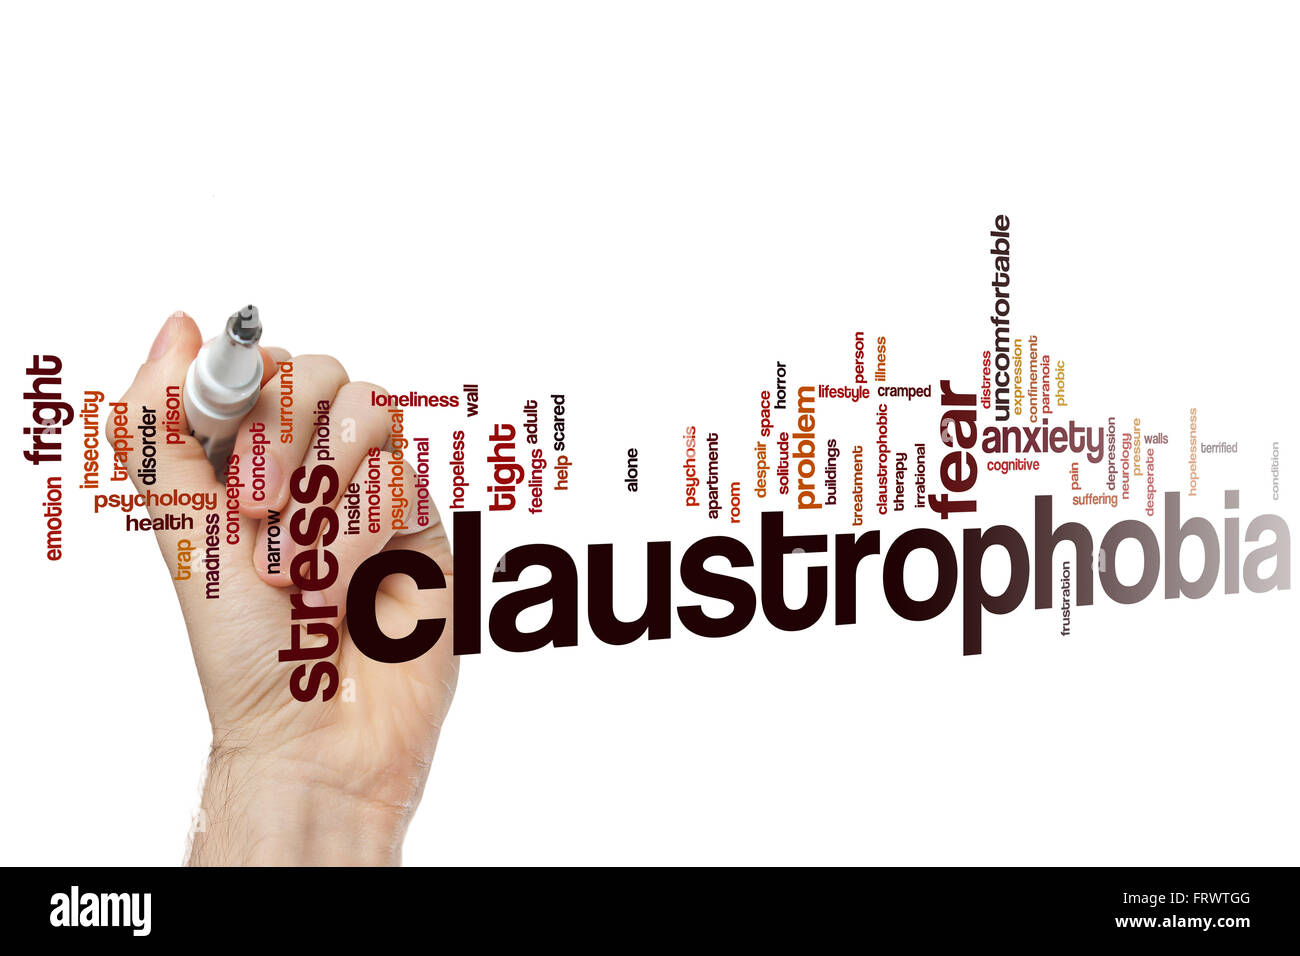 Claustrophobia concept word cloud background Stock Photo